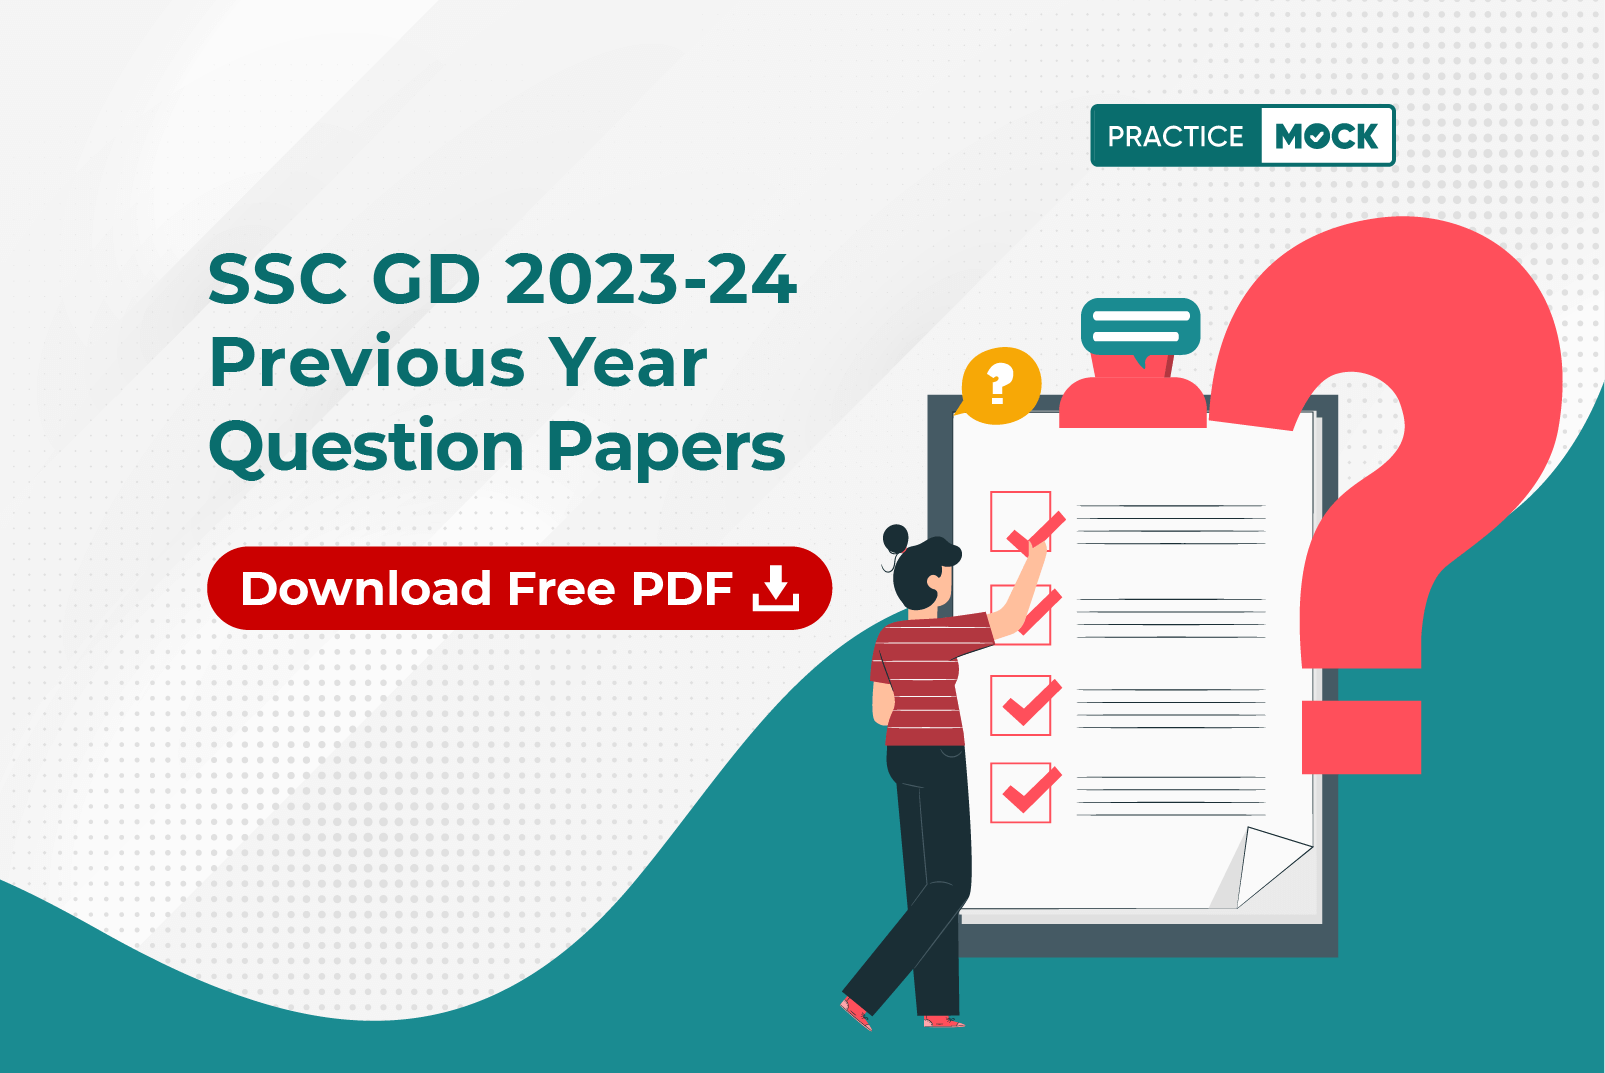 SSC GD Previous Year Question Papers, Download PDF (2)